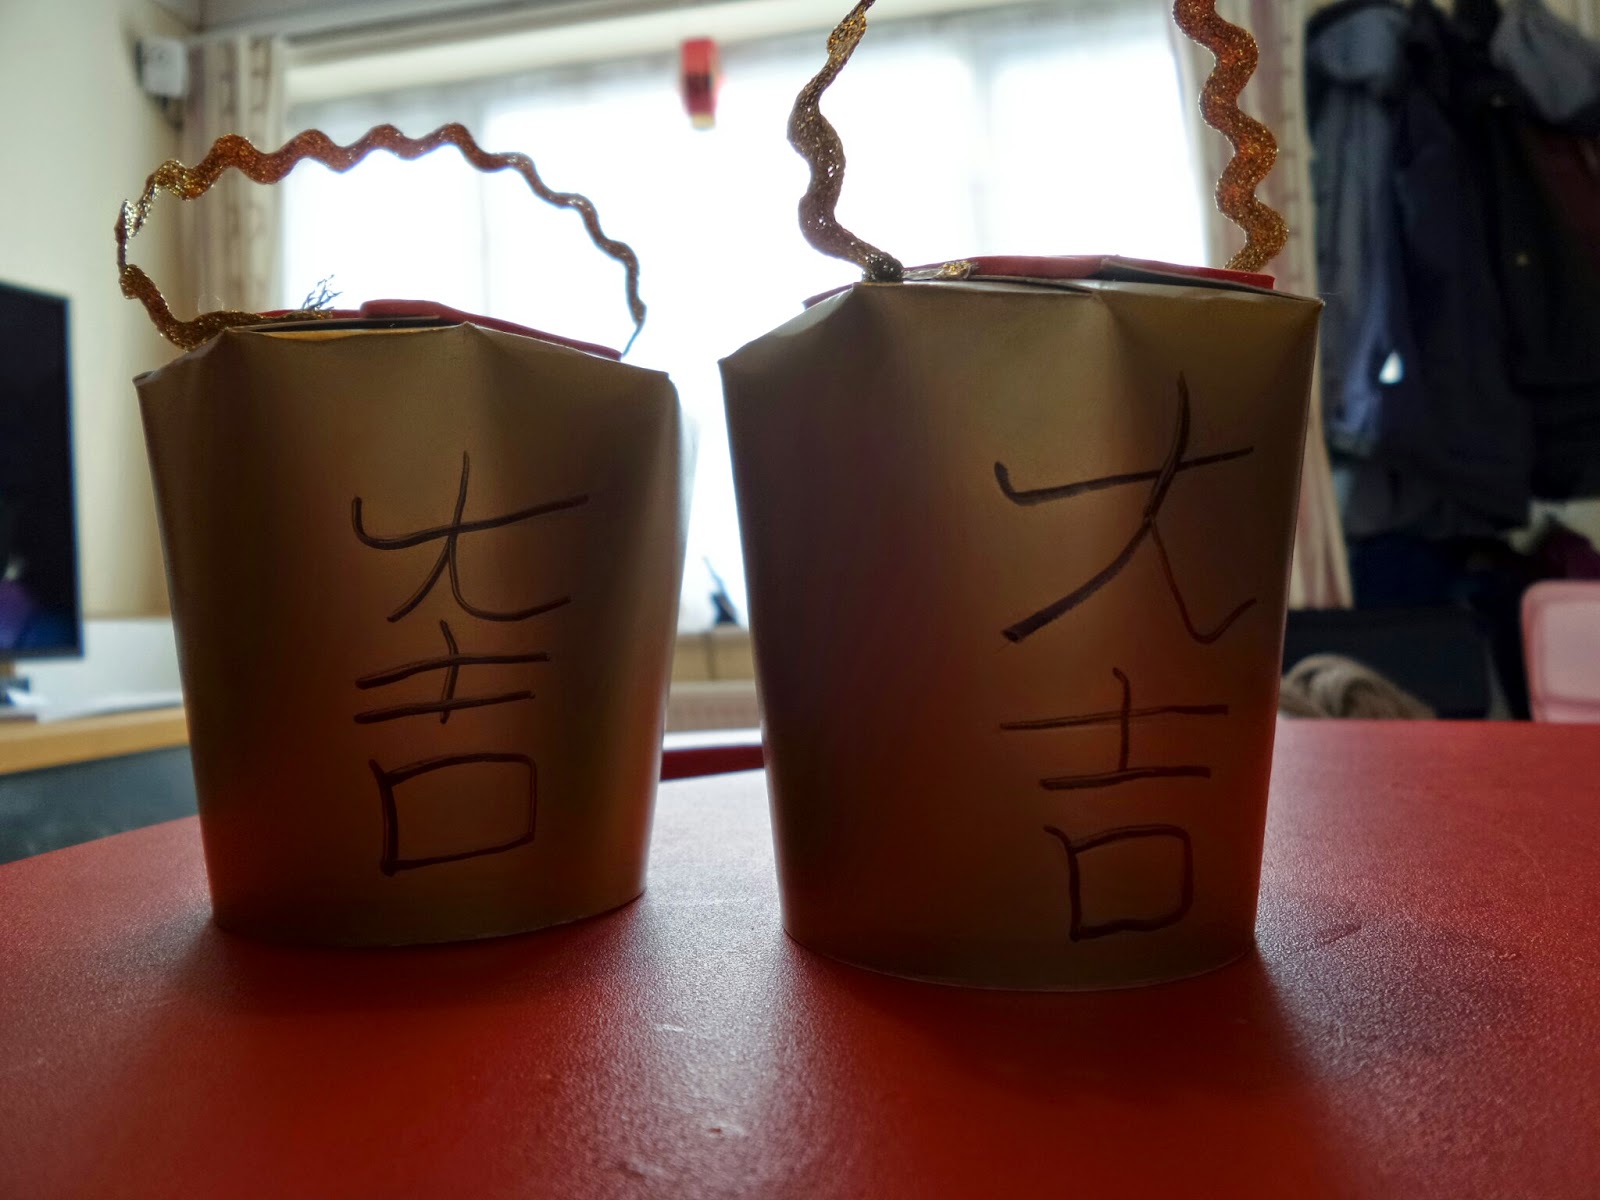 A Chinese Money Cup with Good Fortune written on it